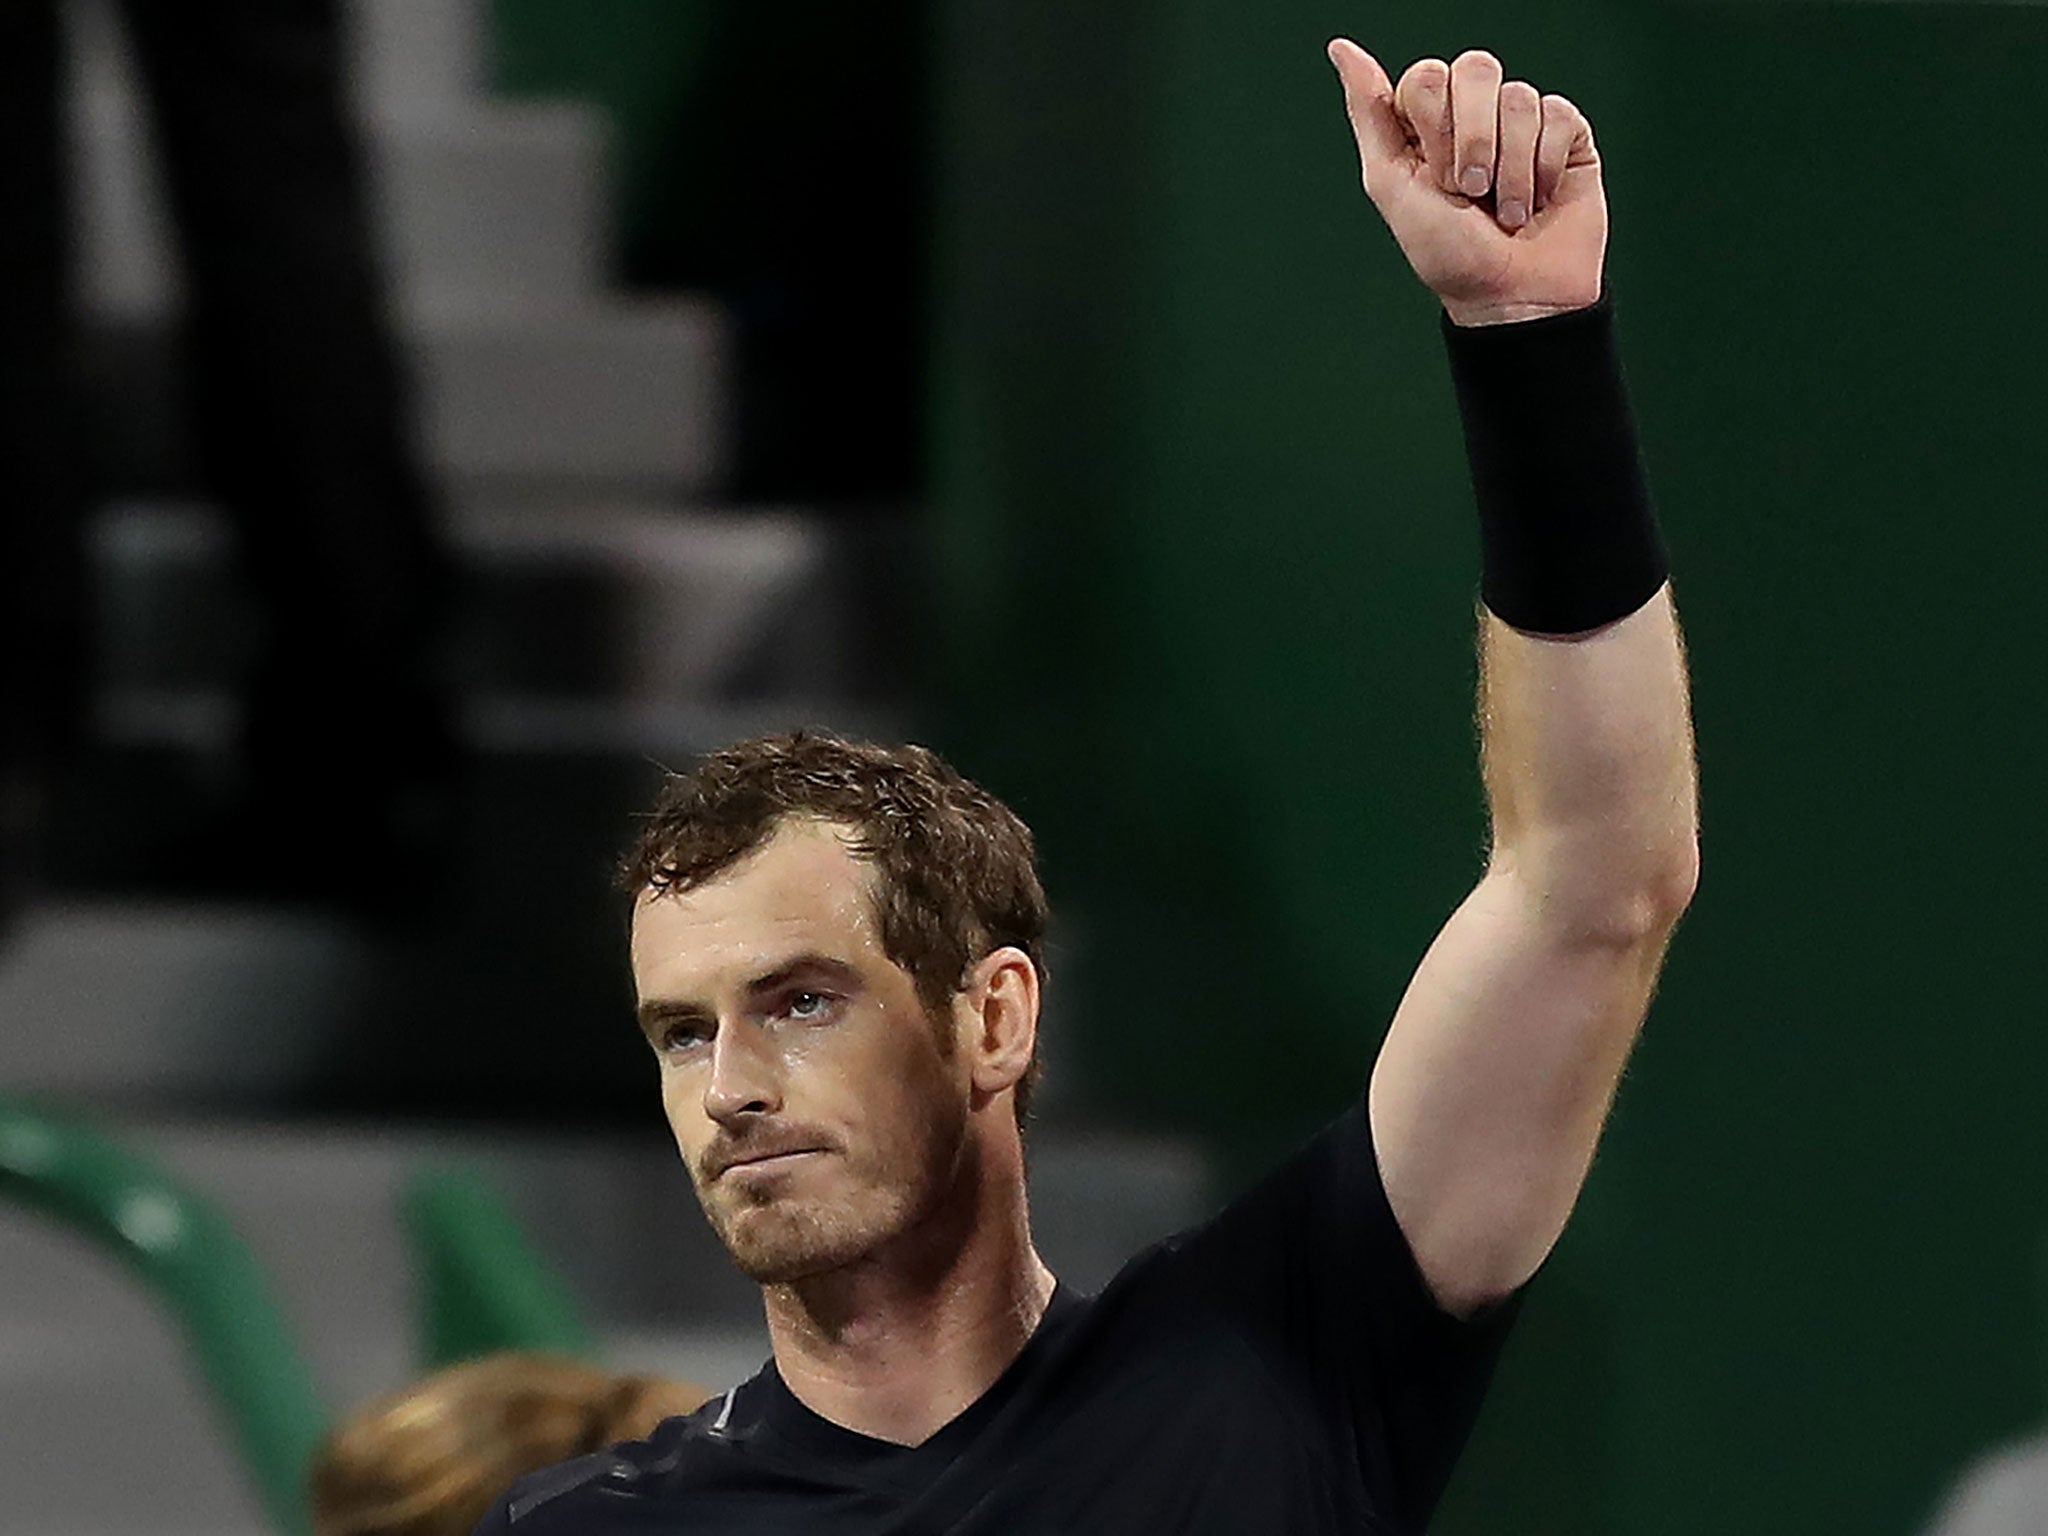 Murray looks on course to reach the final